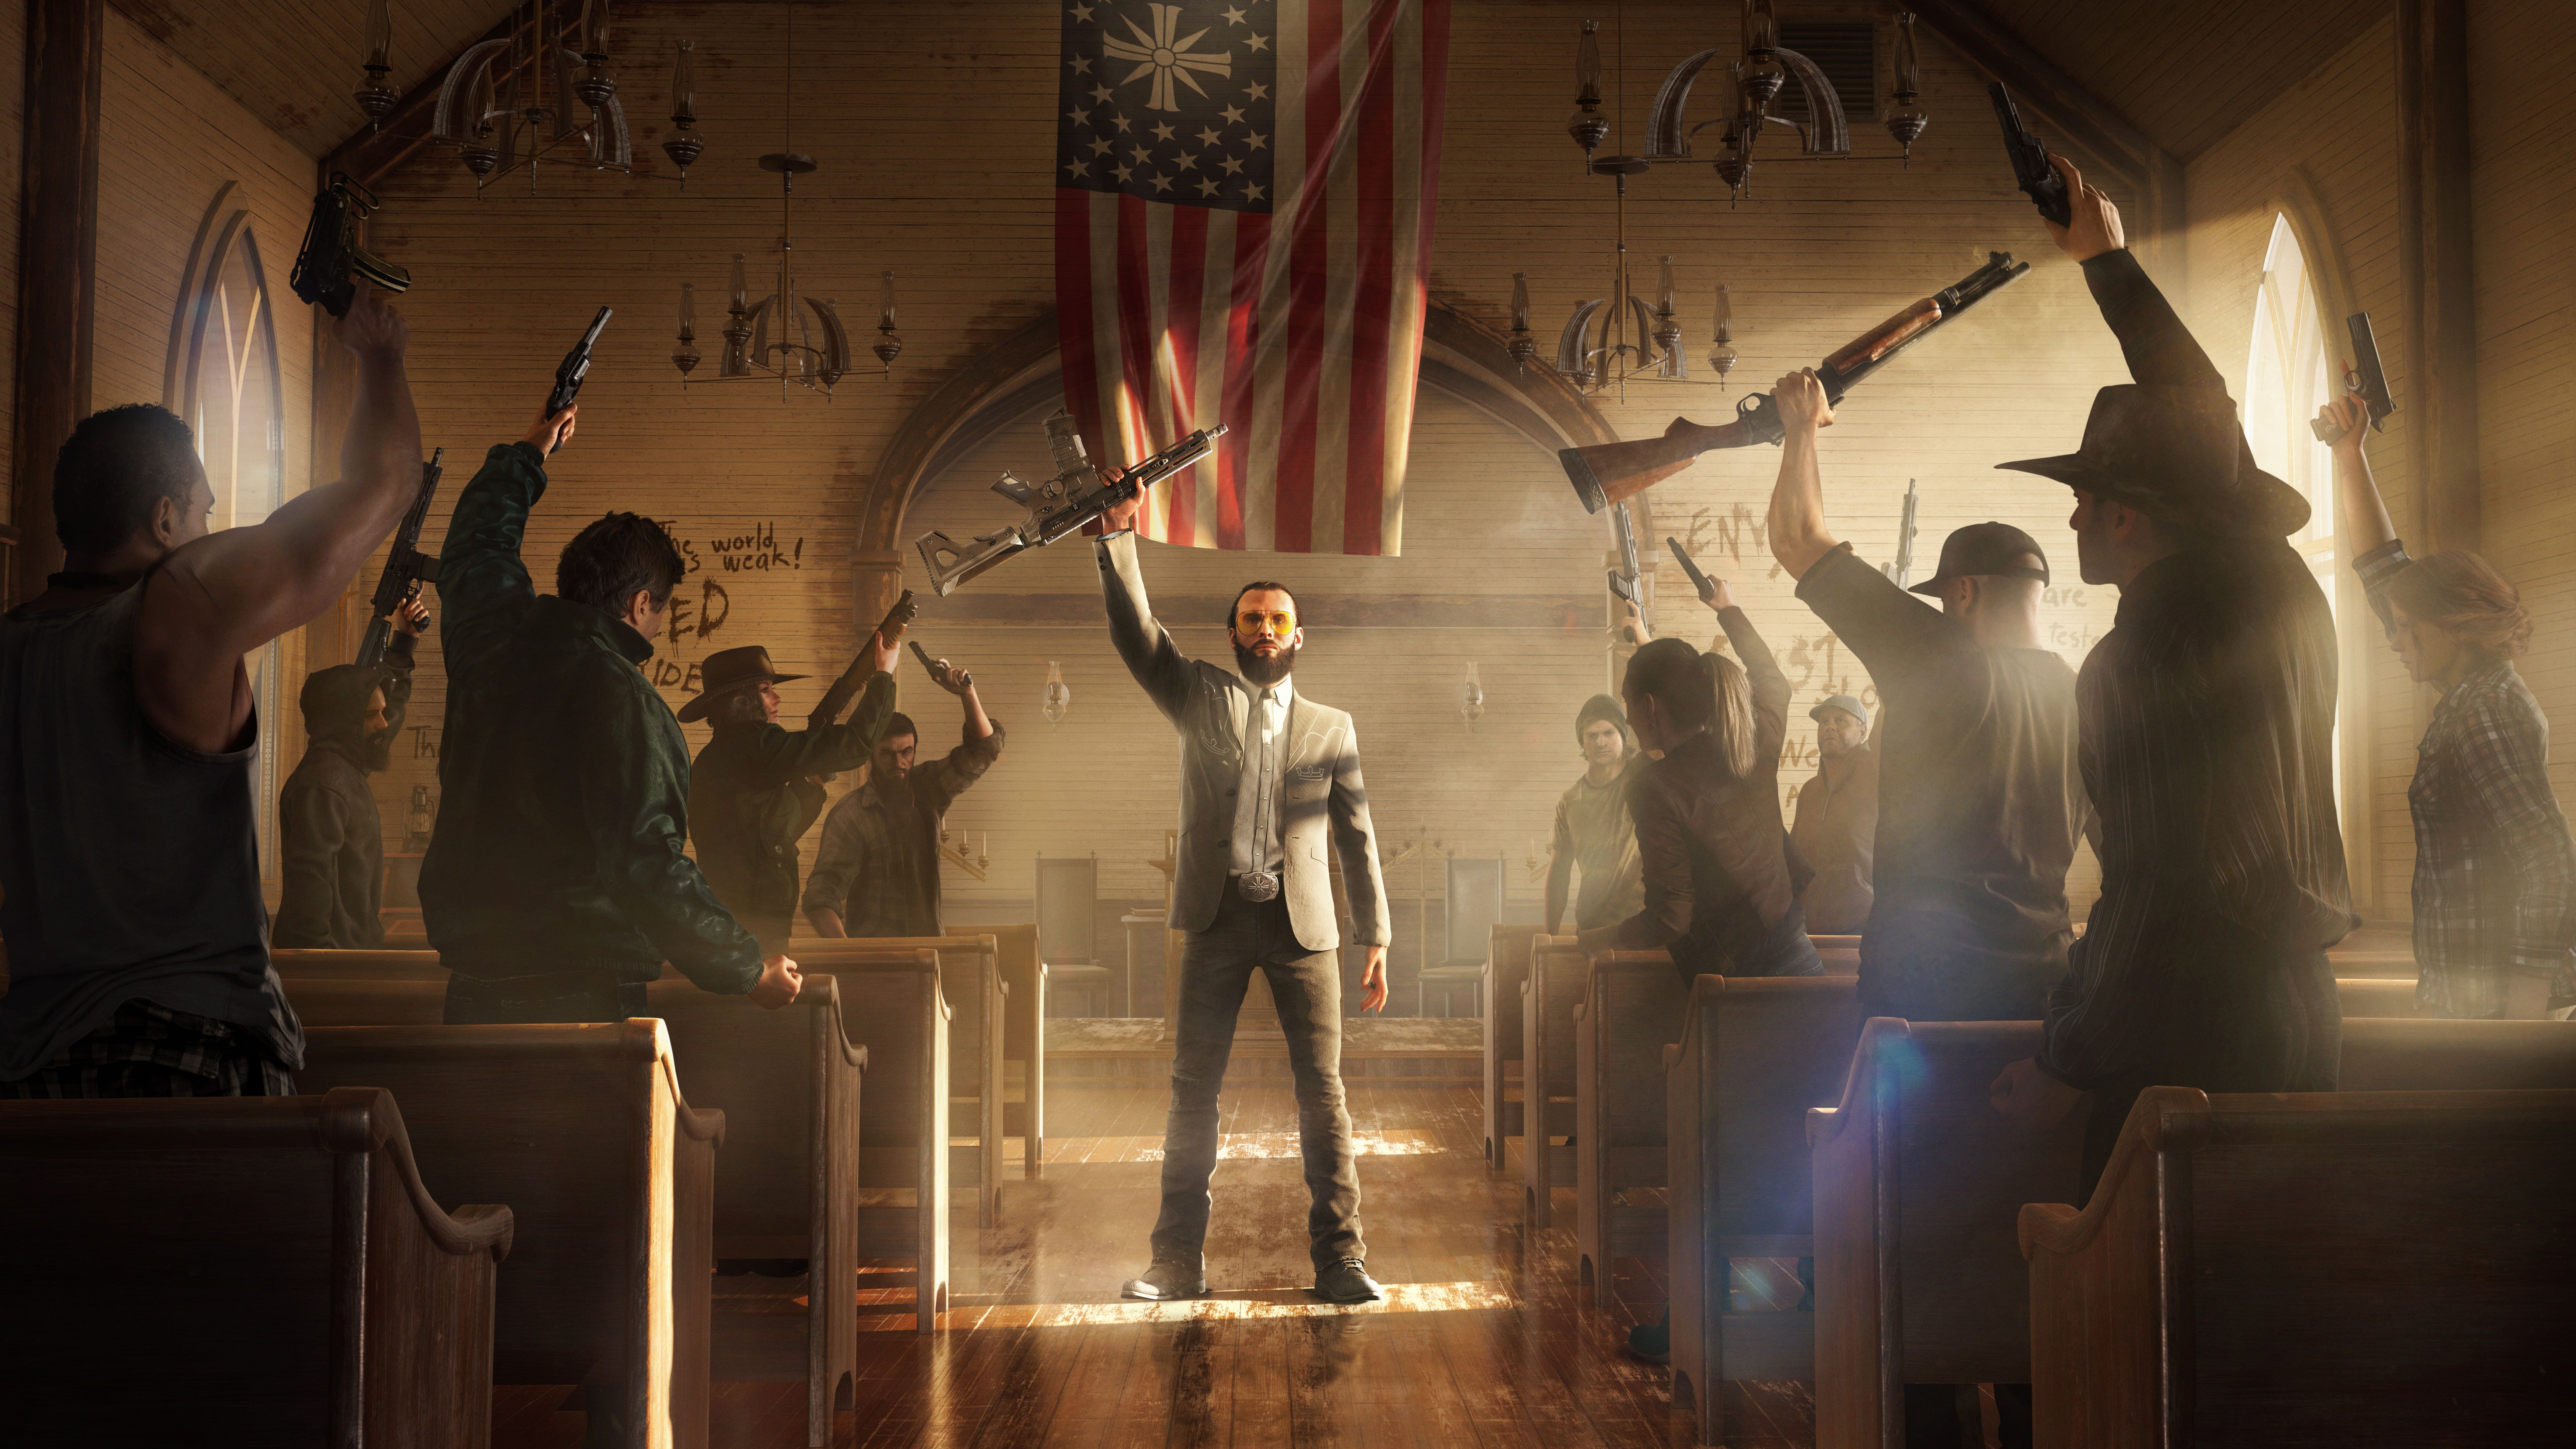 Far Cry 5 Wallpapers